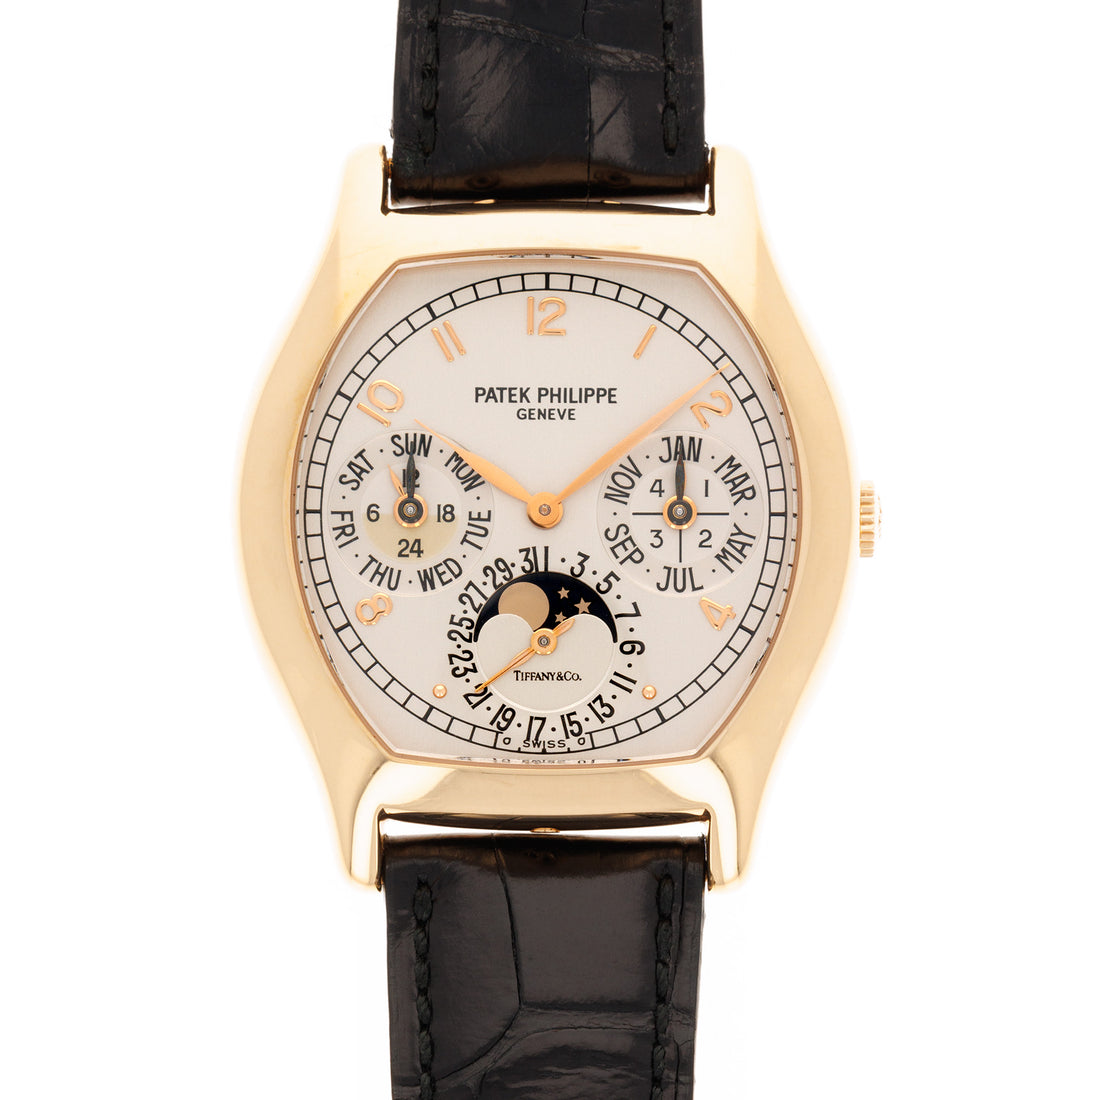 Patek Philippe Rose Gold Perpetual Calendar Ref. 5040 retailed by Tiffany & Co.